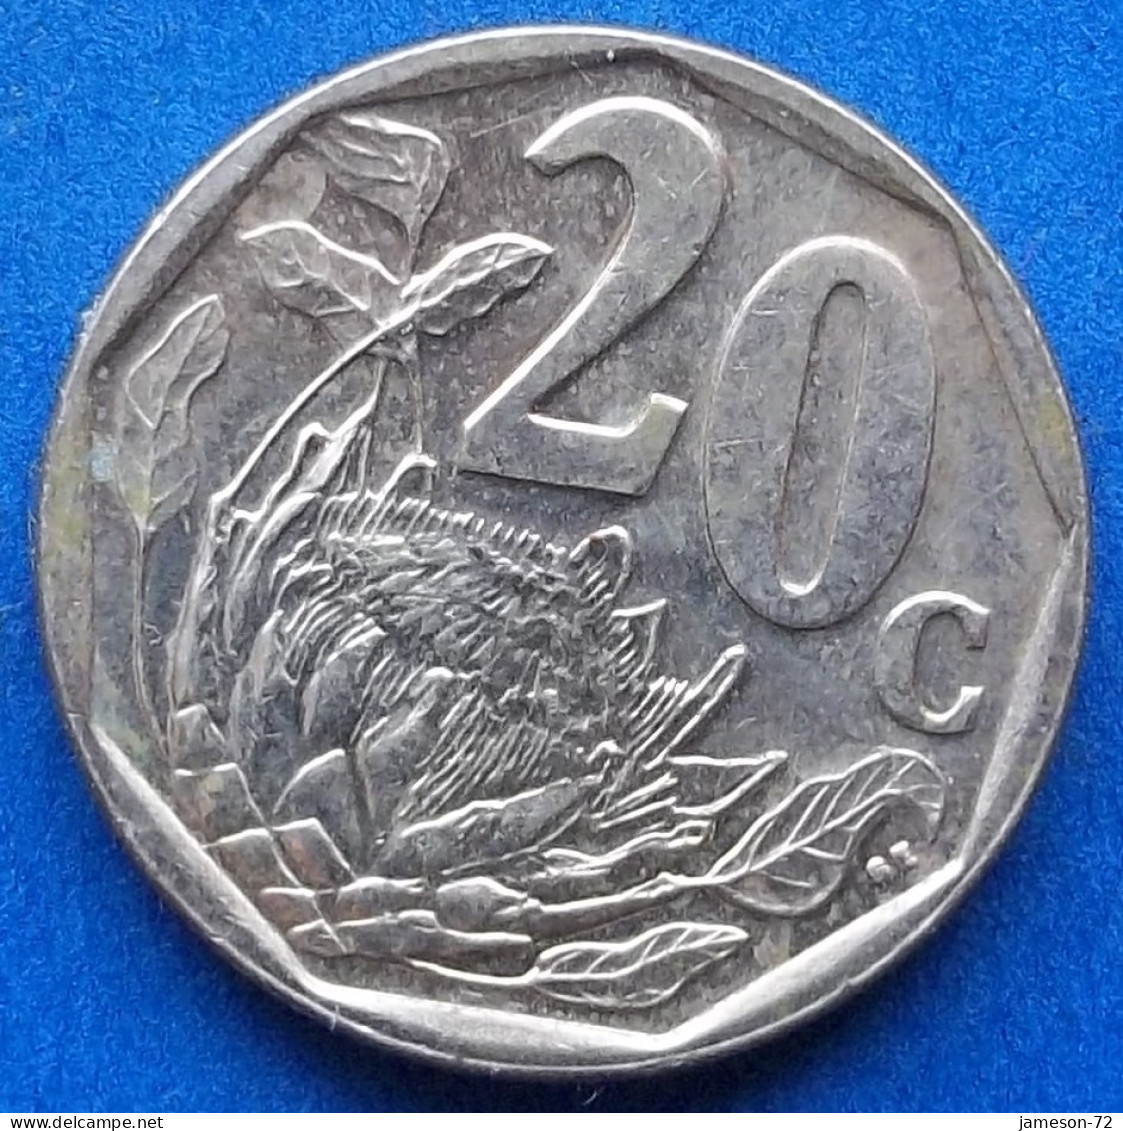 SOUTH AFRICA - 20 Cents 2021 "Protea Flower" KM# 442 Republic (1961) - Edelweiss Coins - South Africa